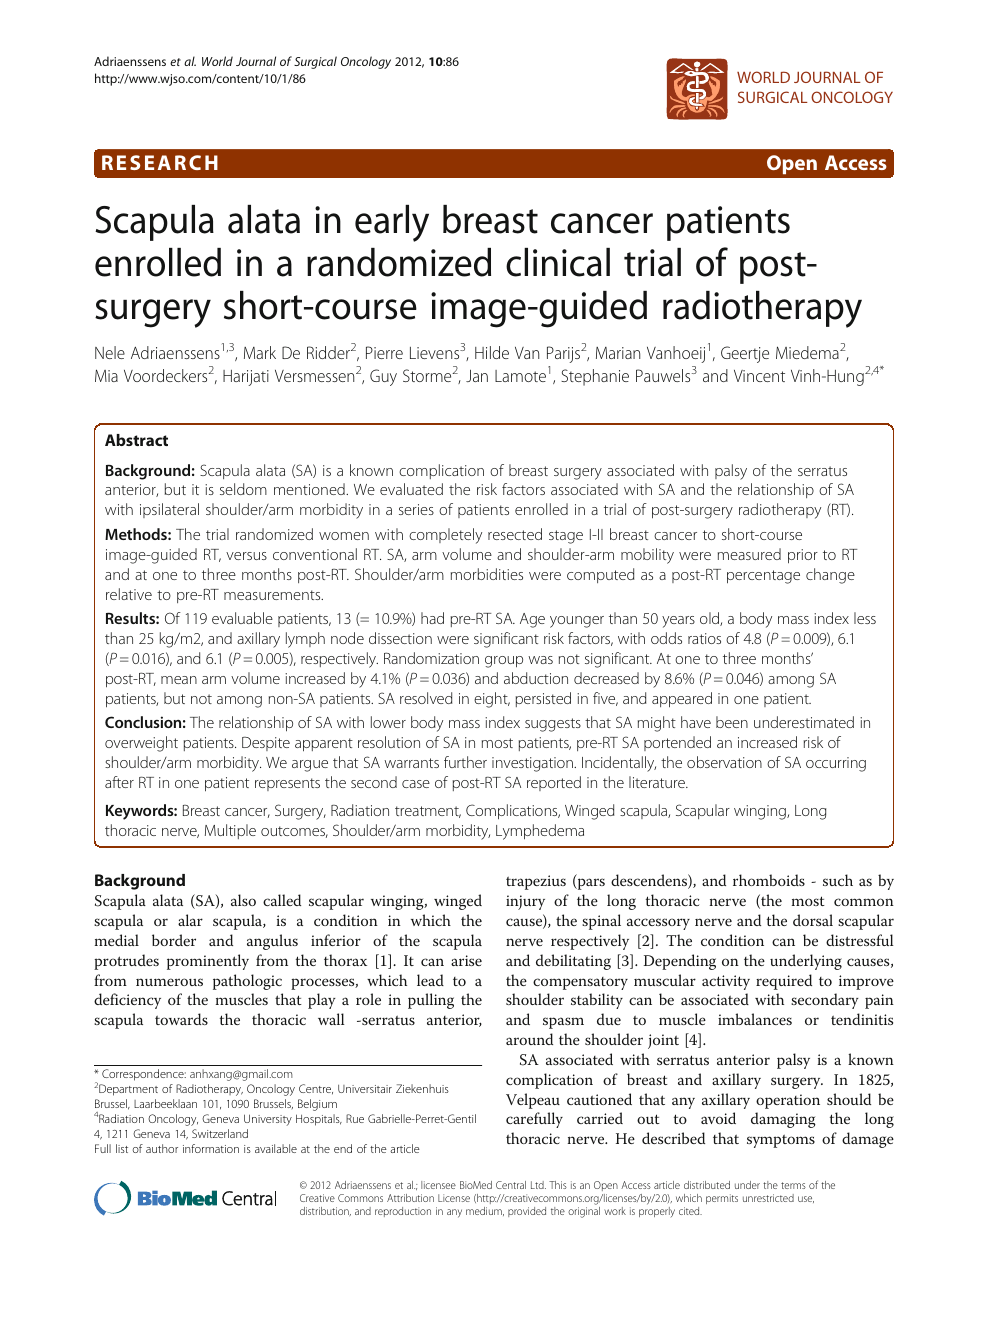 Scapula alata in early breast cancer patients enrolled in a randomized clinical trial of post-surgery short-course image-guided radiotherapy – topic of research paper in Medical Download scholarly article read